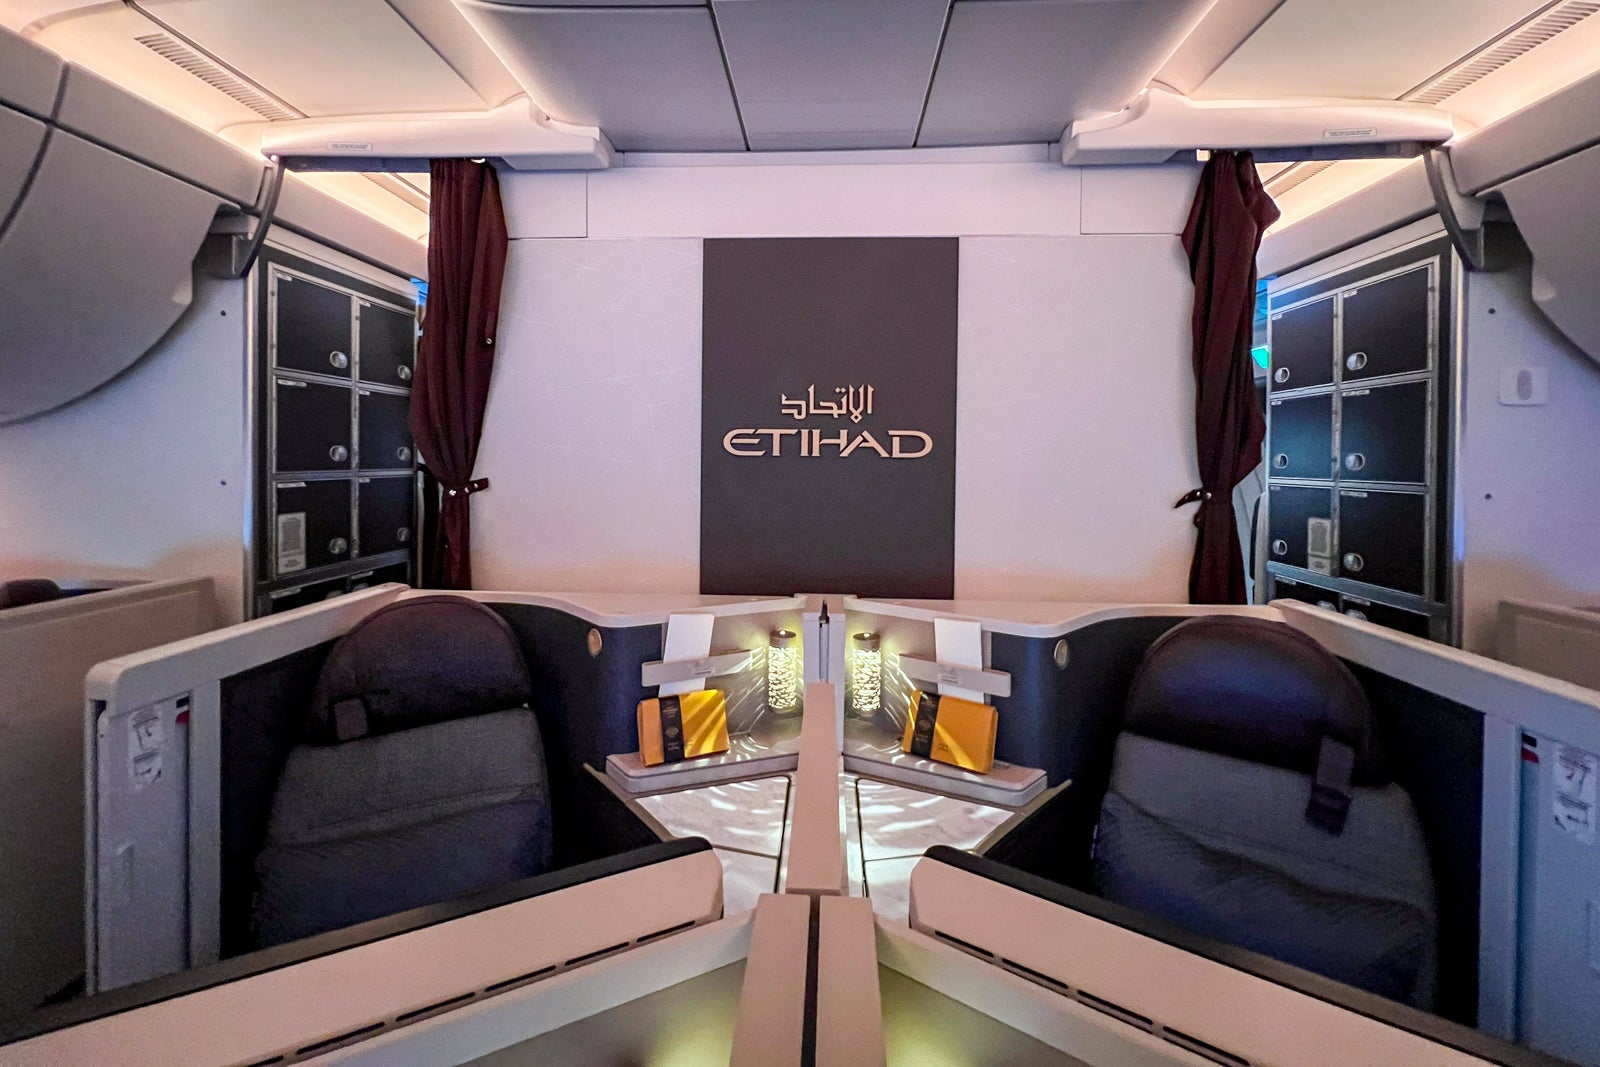 A review of Etihad's business-class suite on the Airbus A350-1000